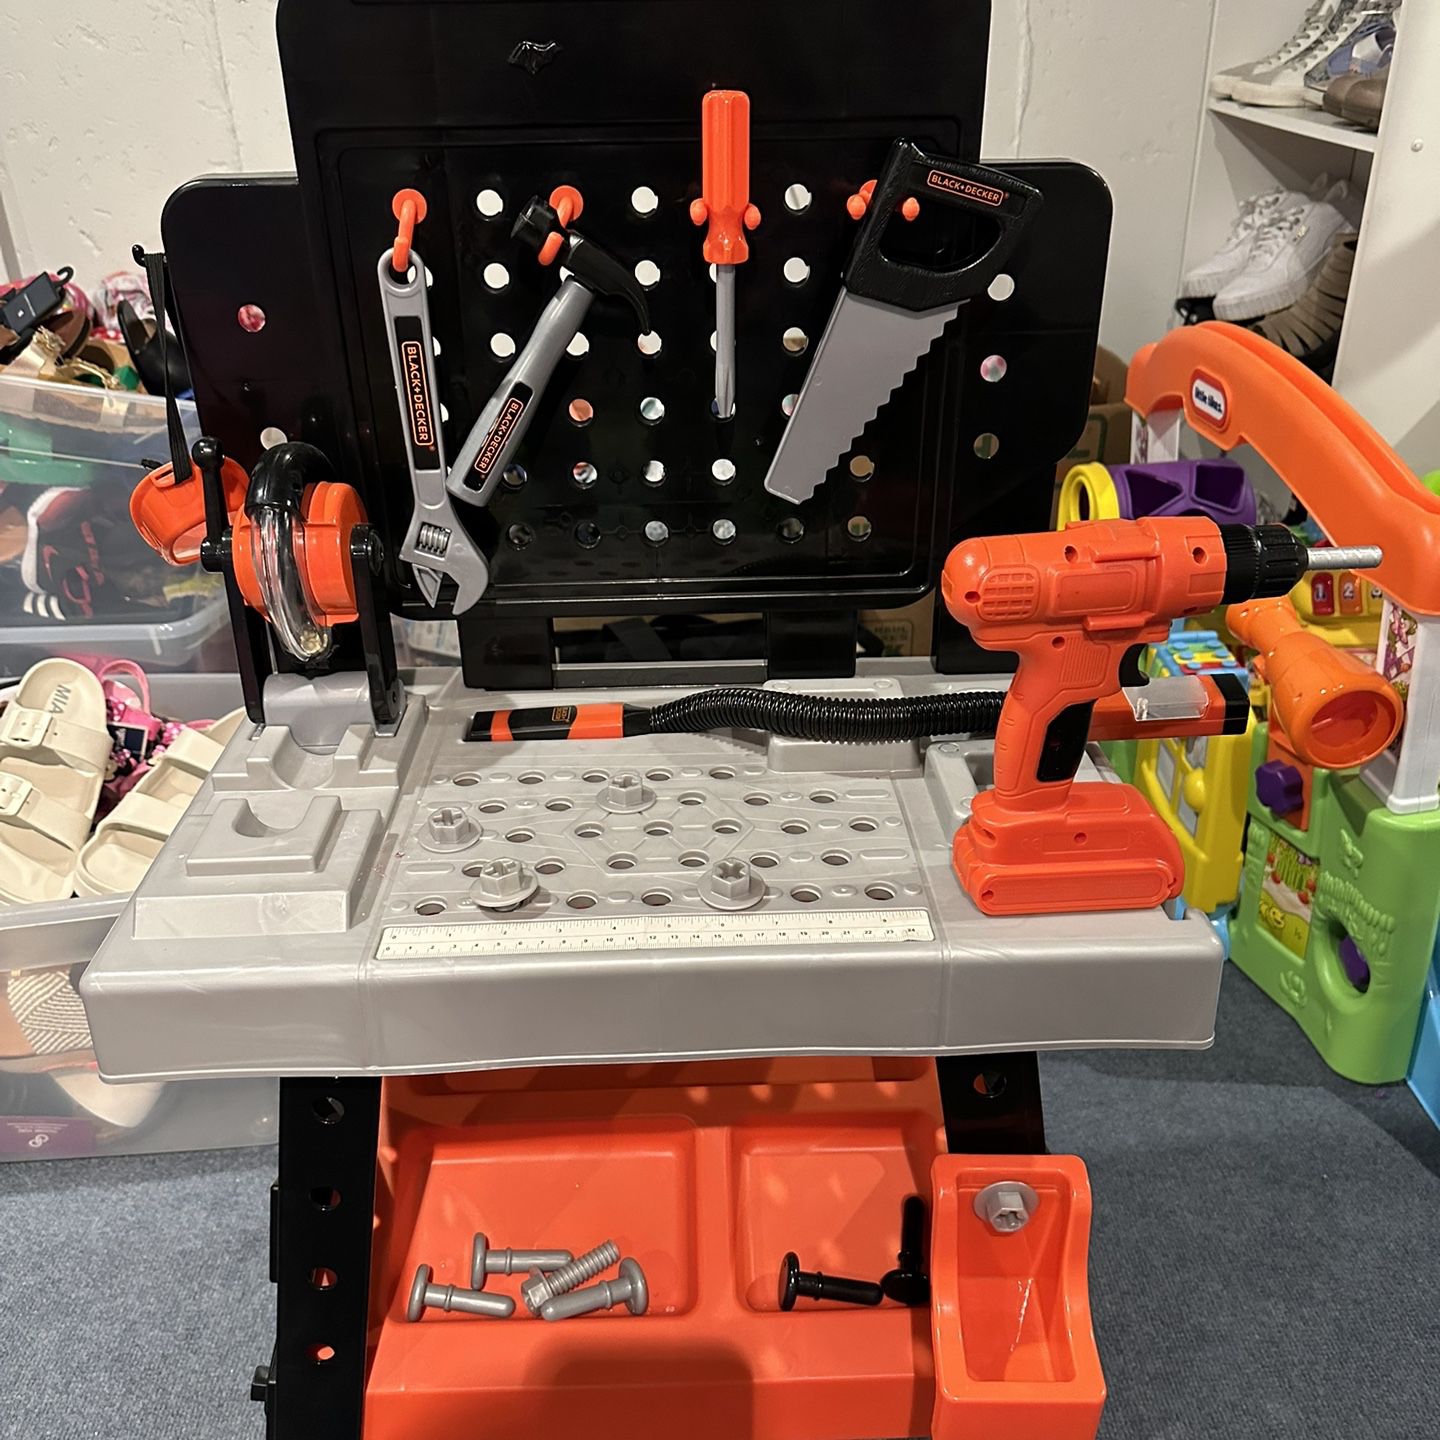 Black & Decker Toys - 34 Parts - DIY Toolbox » Prompt Shipping